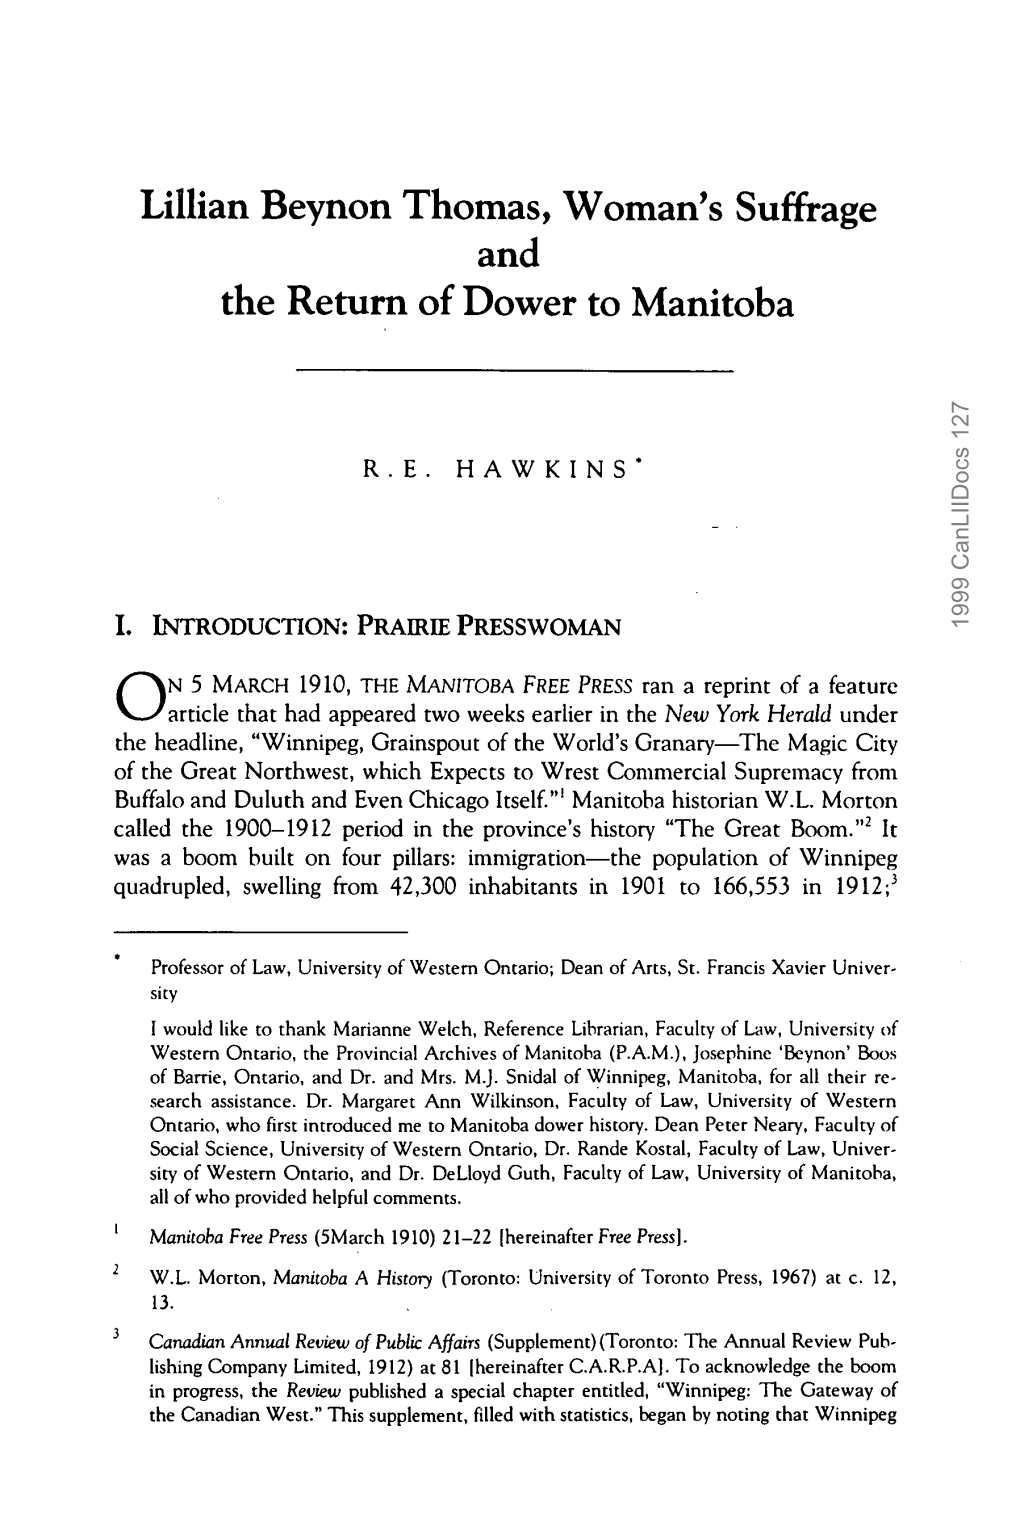 Lillian Beynon Thomas, Woman's Suffrage and the Return of Dower to Manitoba